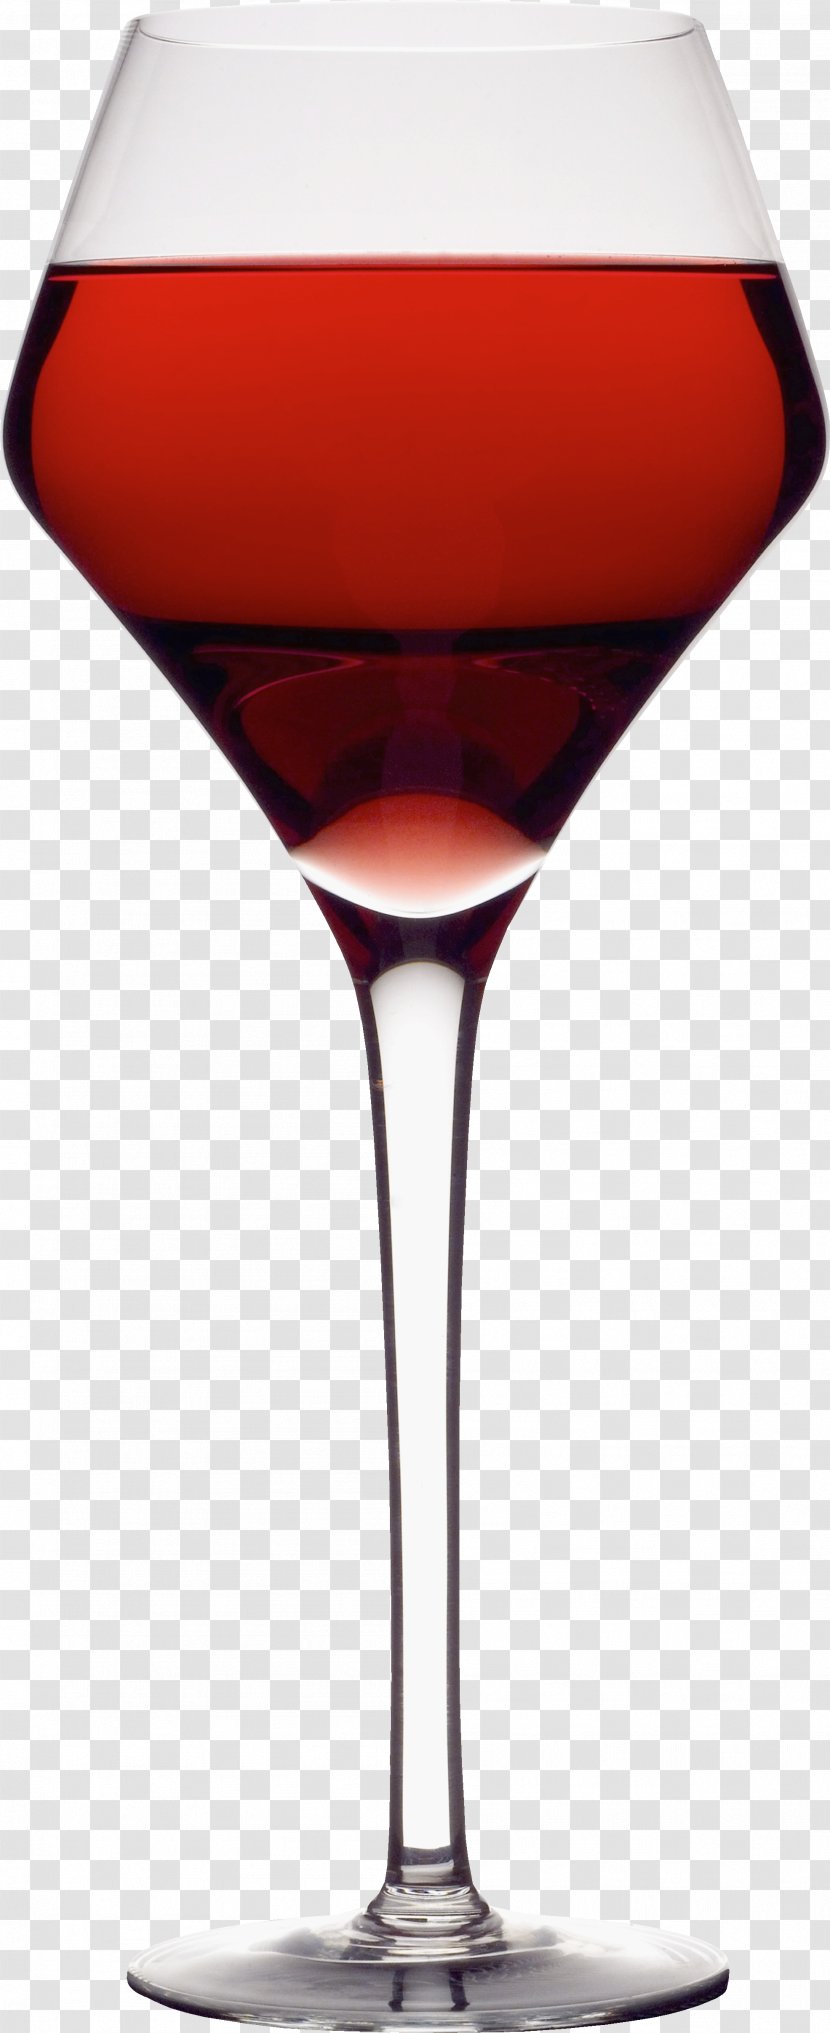 Red Wine Champagne Cognac Glass - Drink - Image Transparent PNG